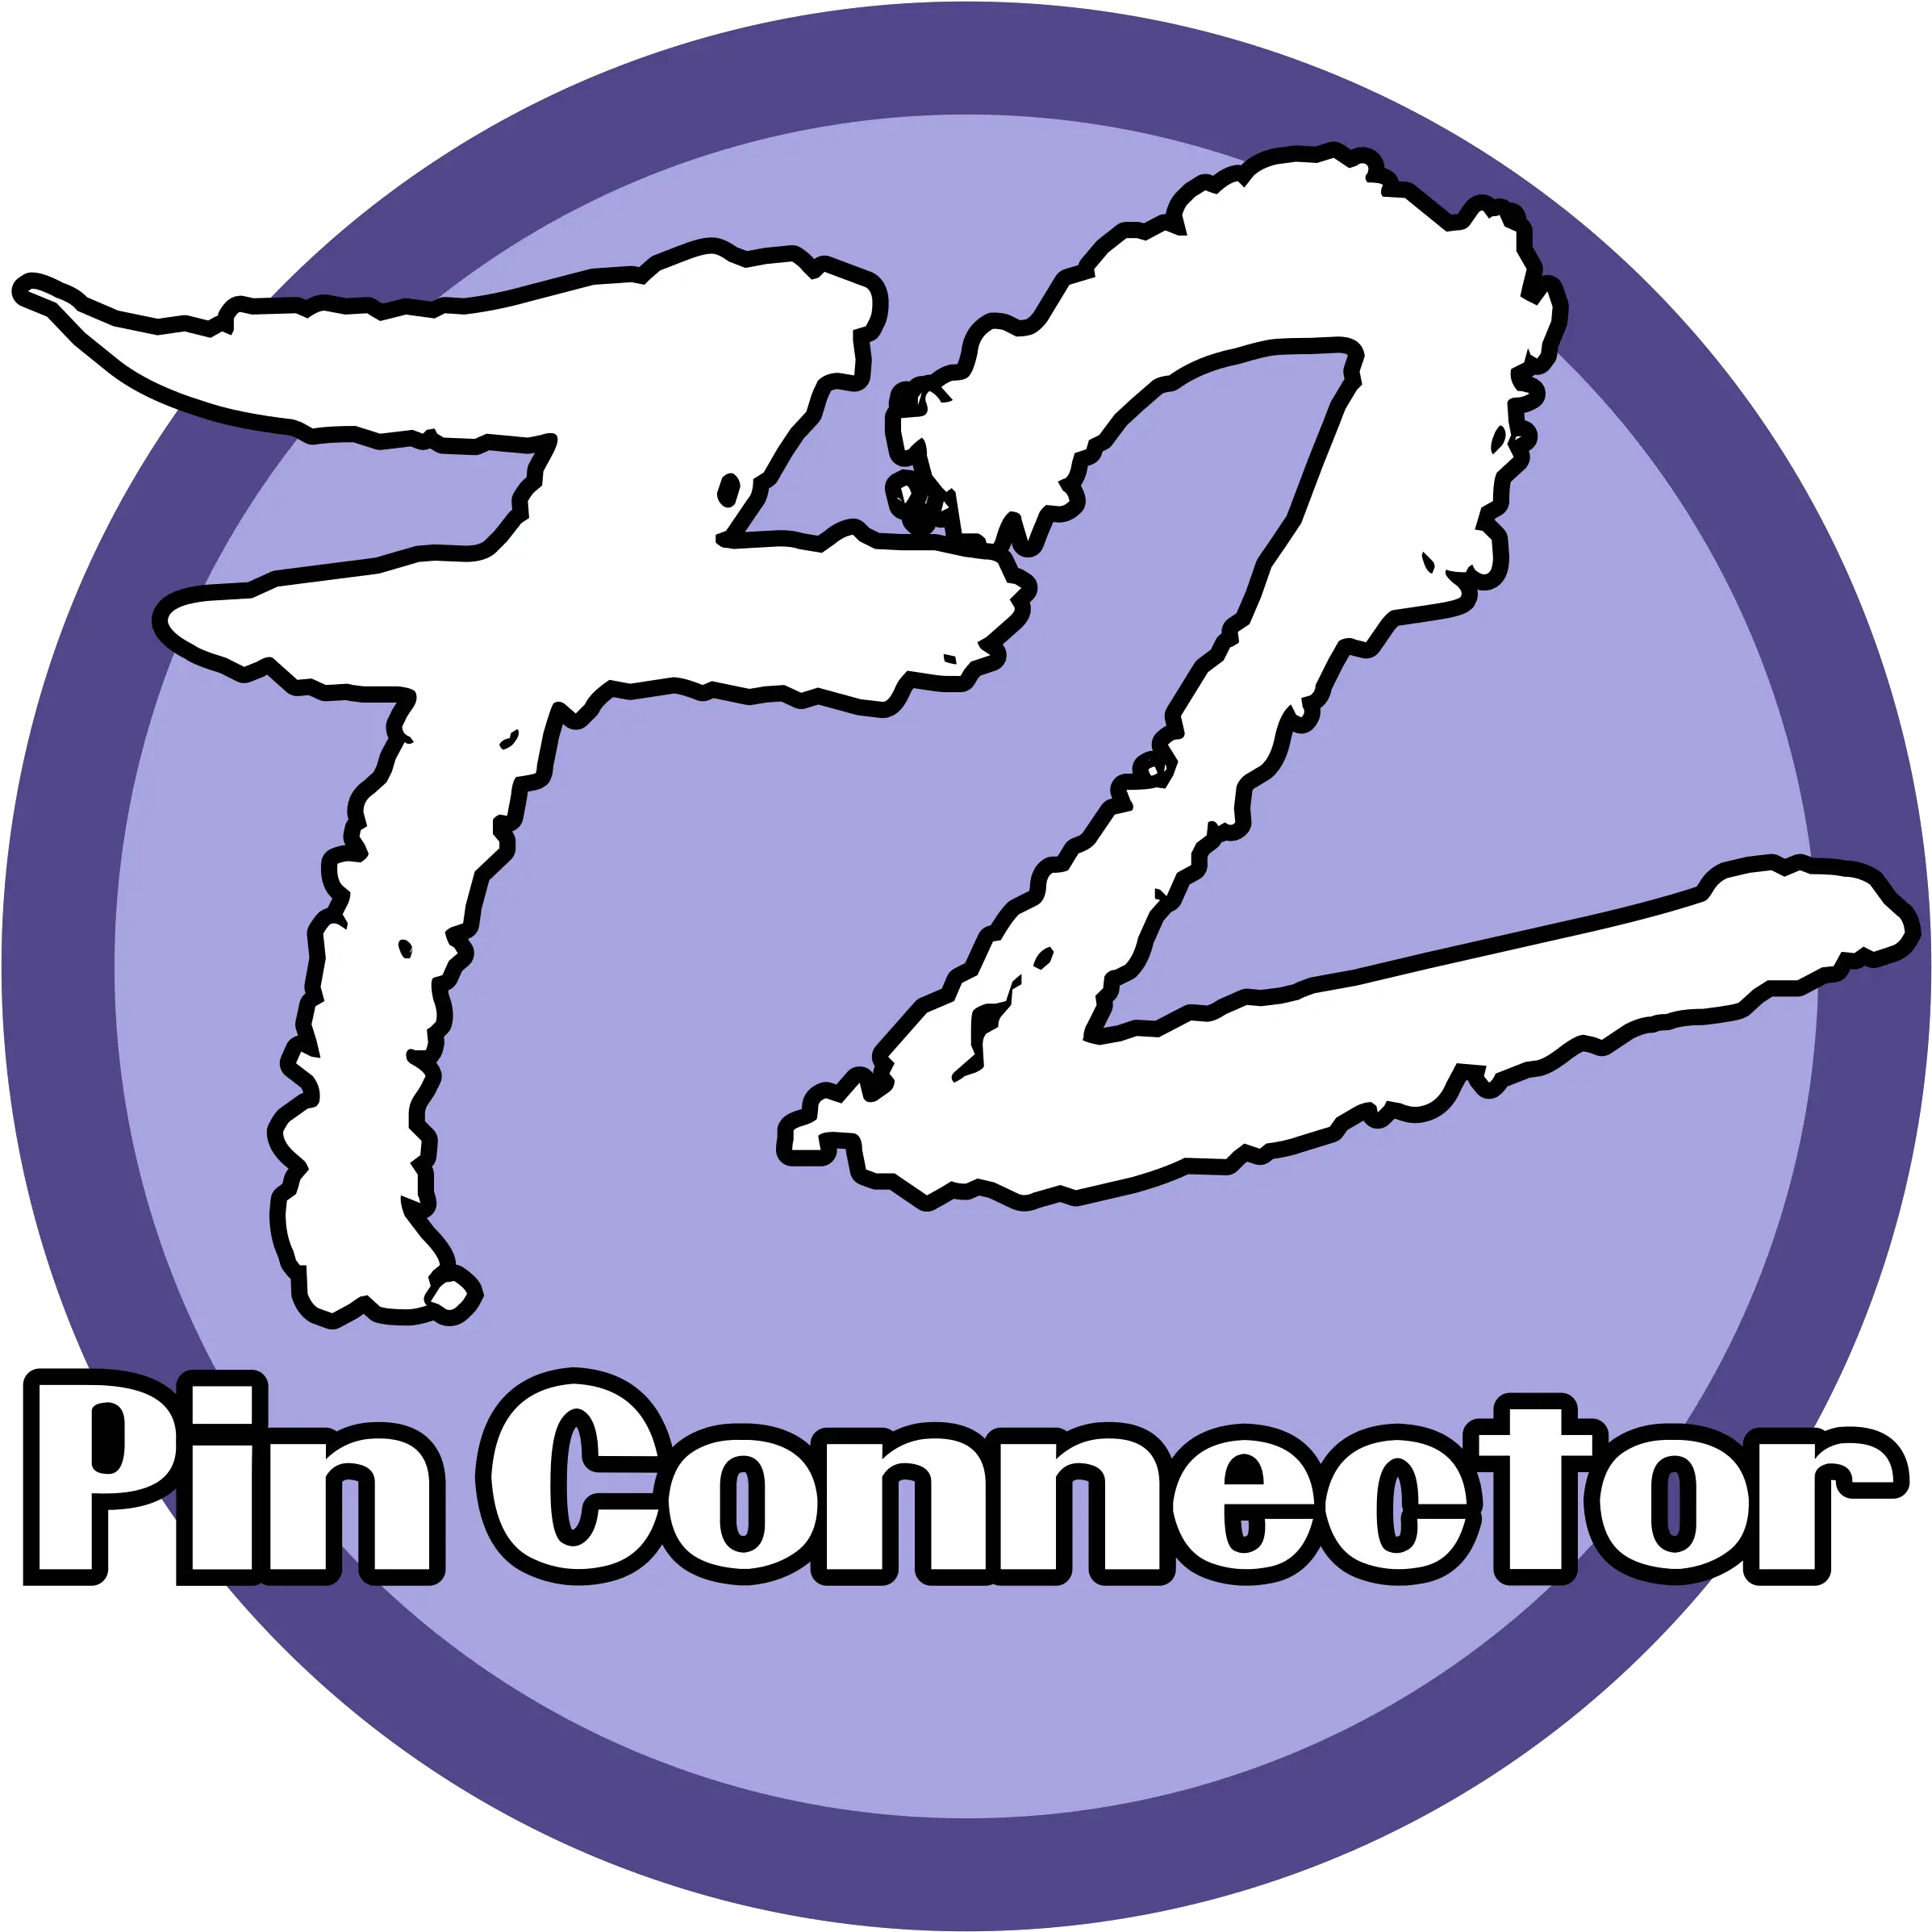 72pc Logos And Media 72 Pin Connector Language Png Snes Logo Png